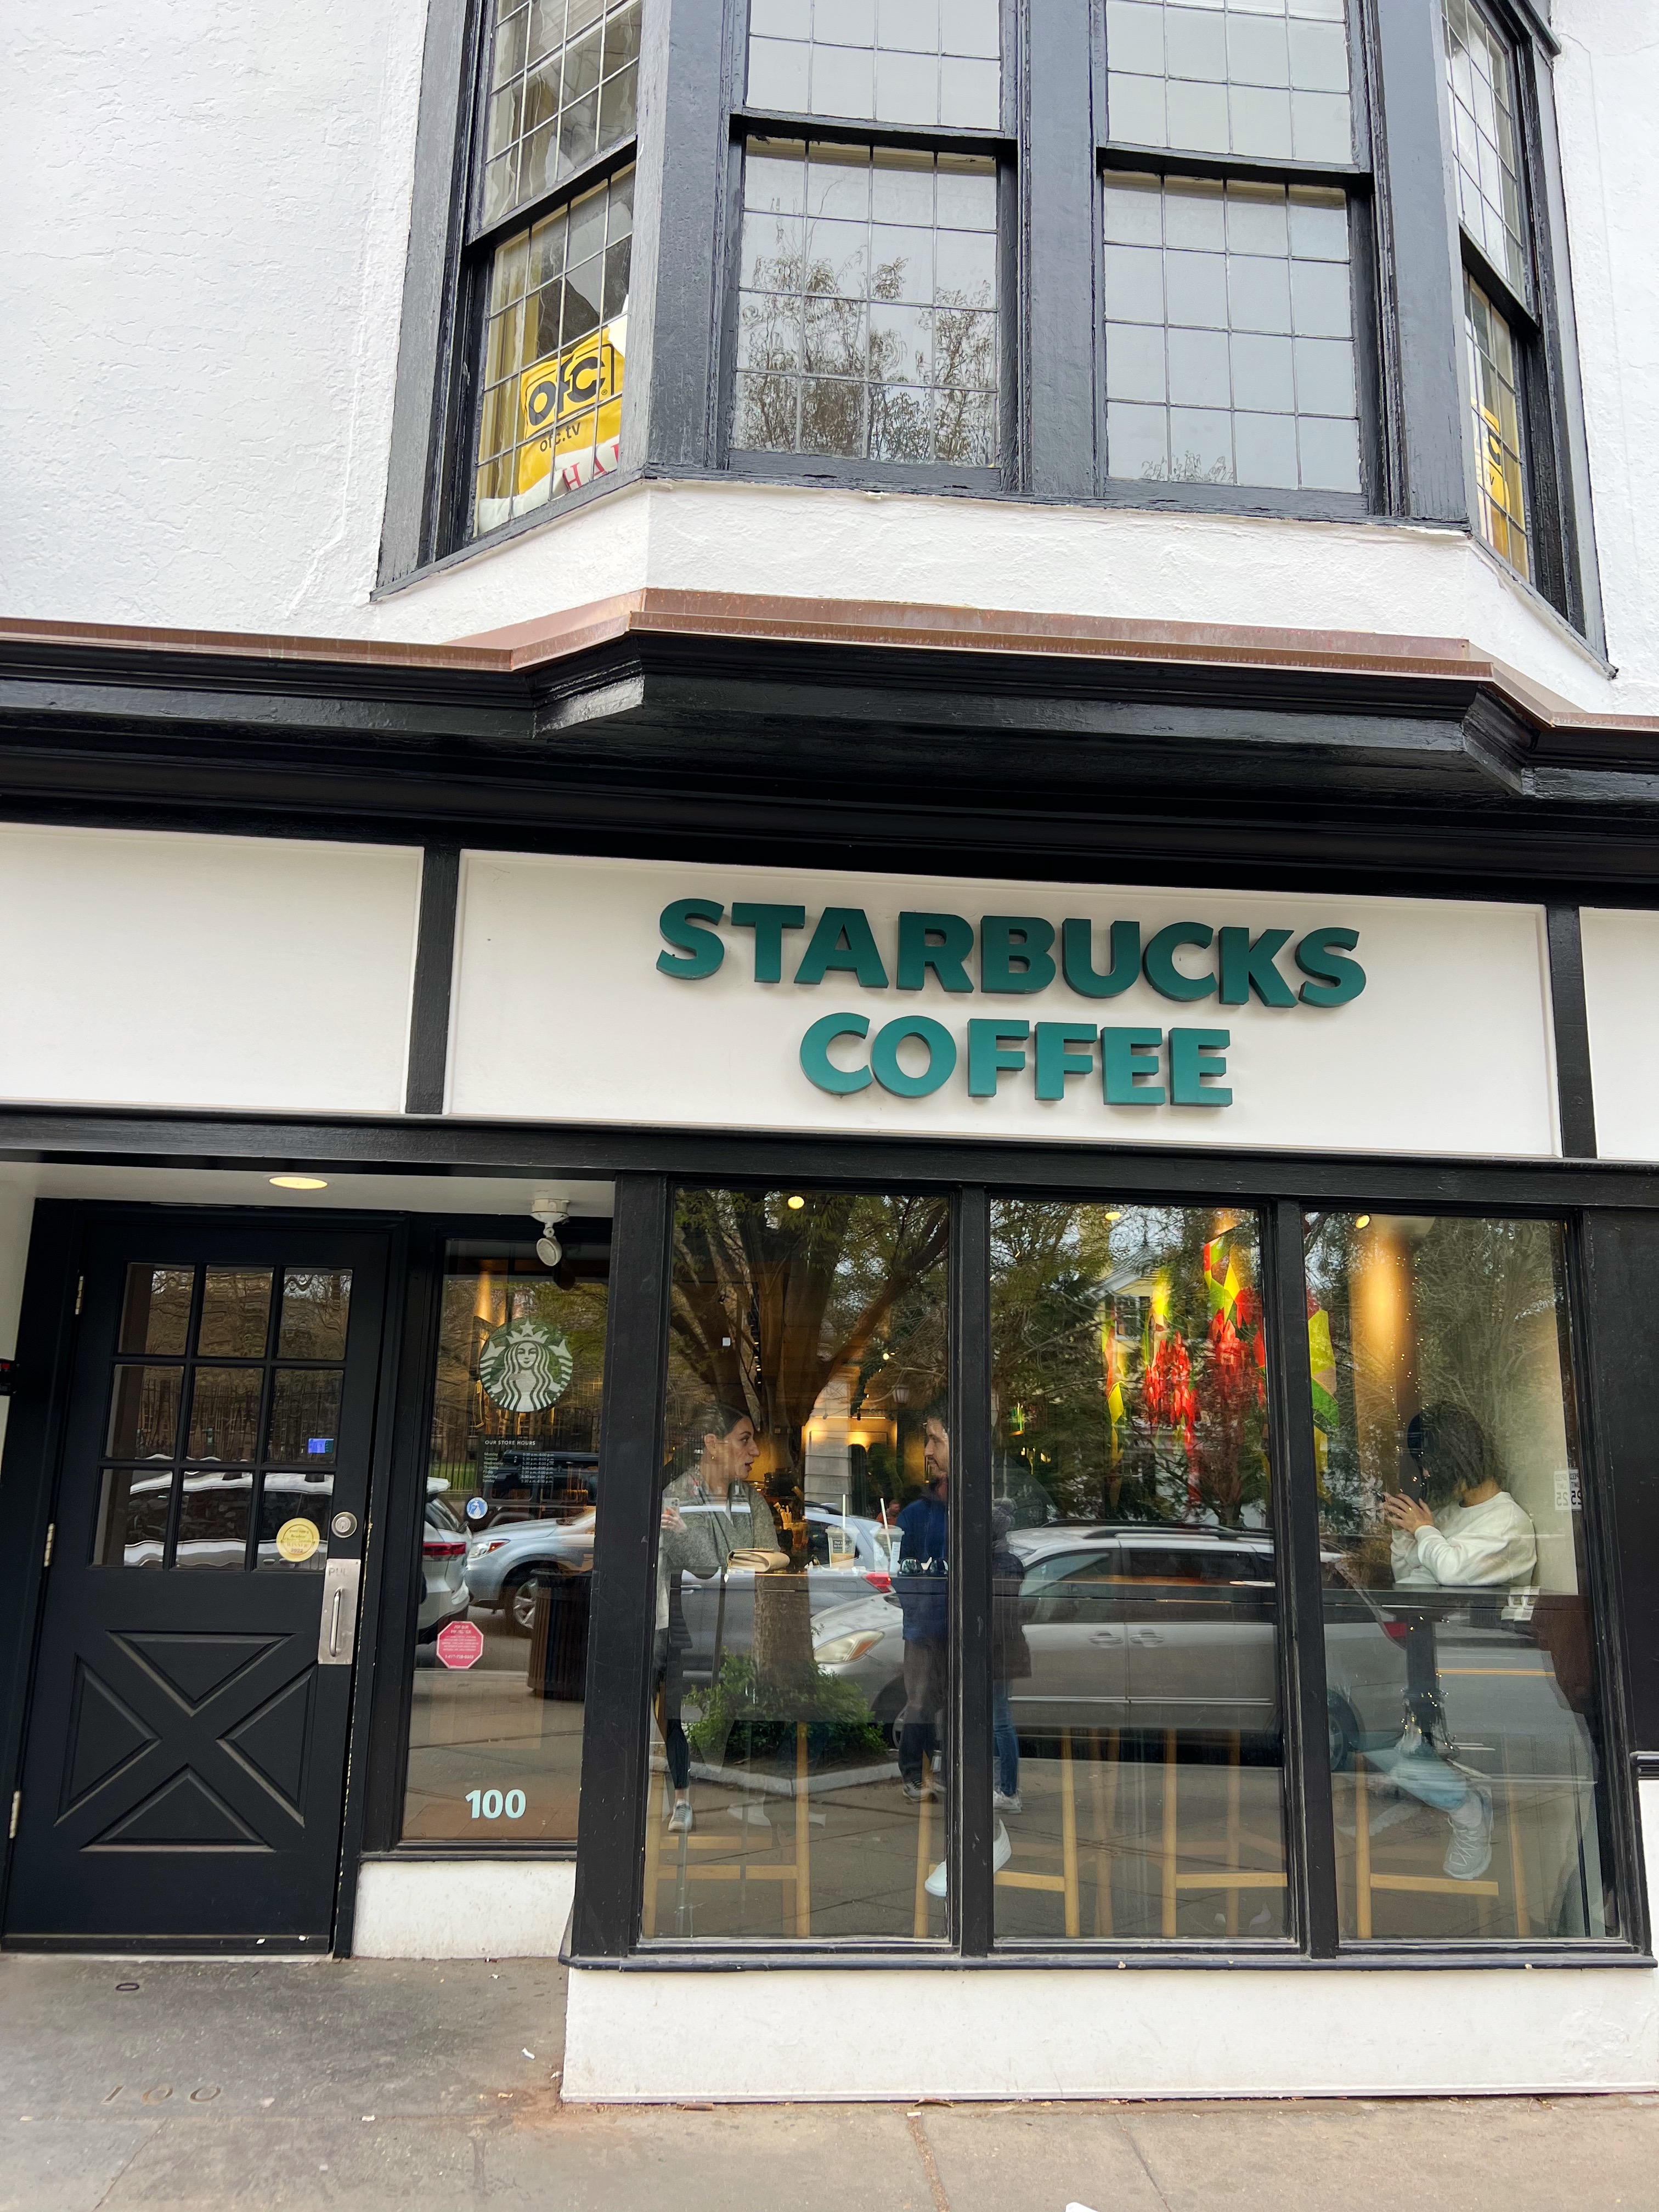 Exterior of Nassau Street Starbuck, tudor style building with green "Starbucks Coffee" lettering